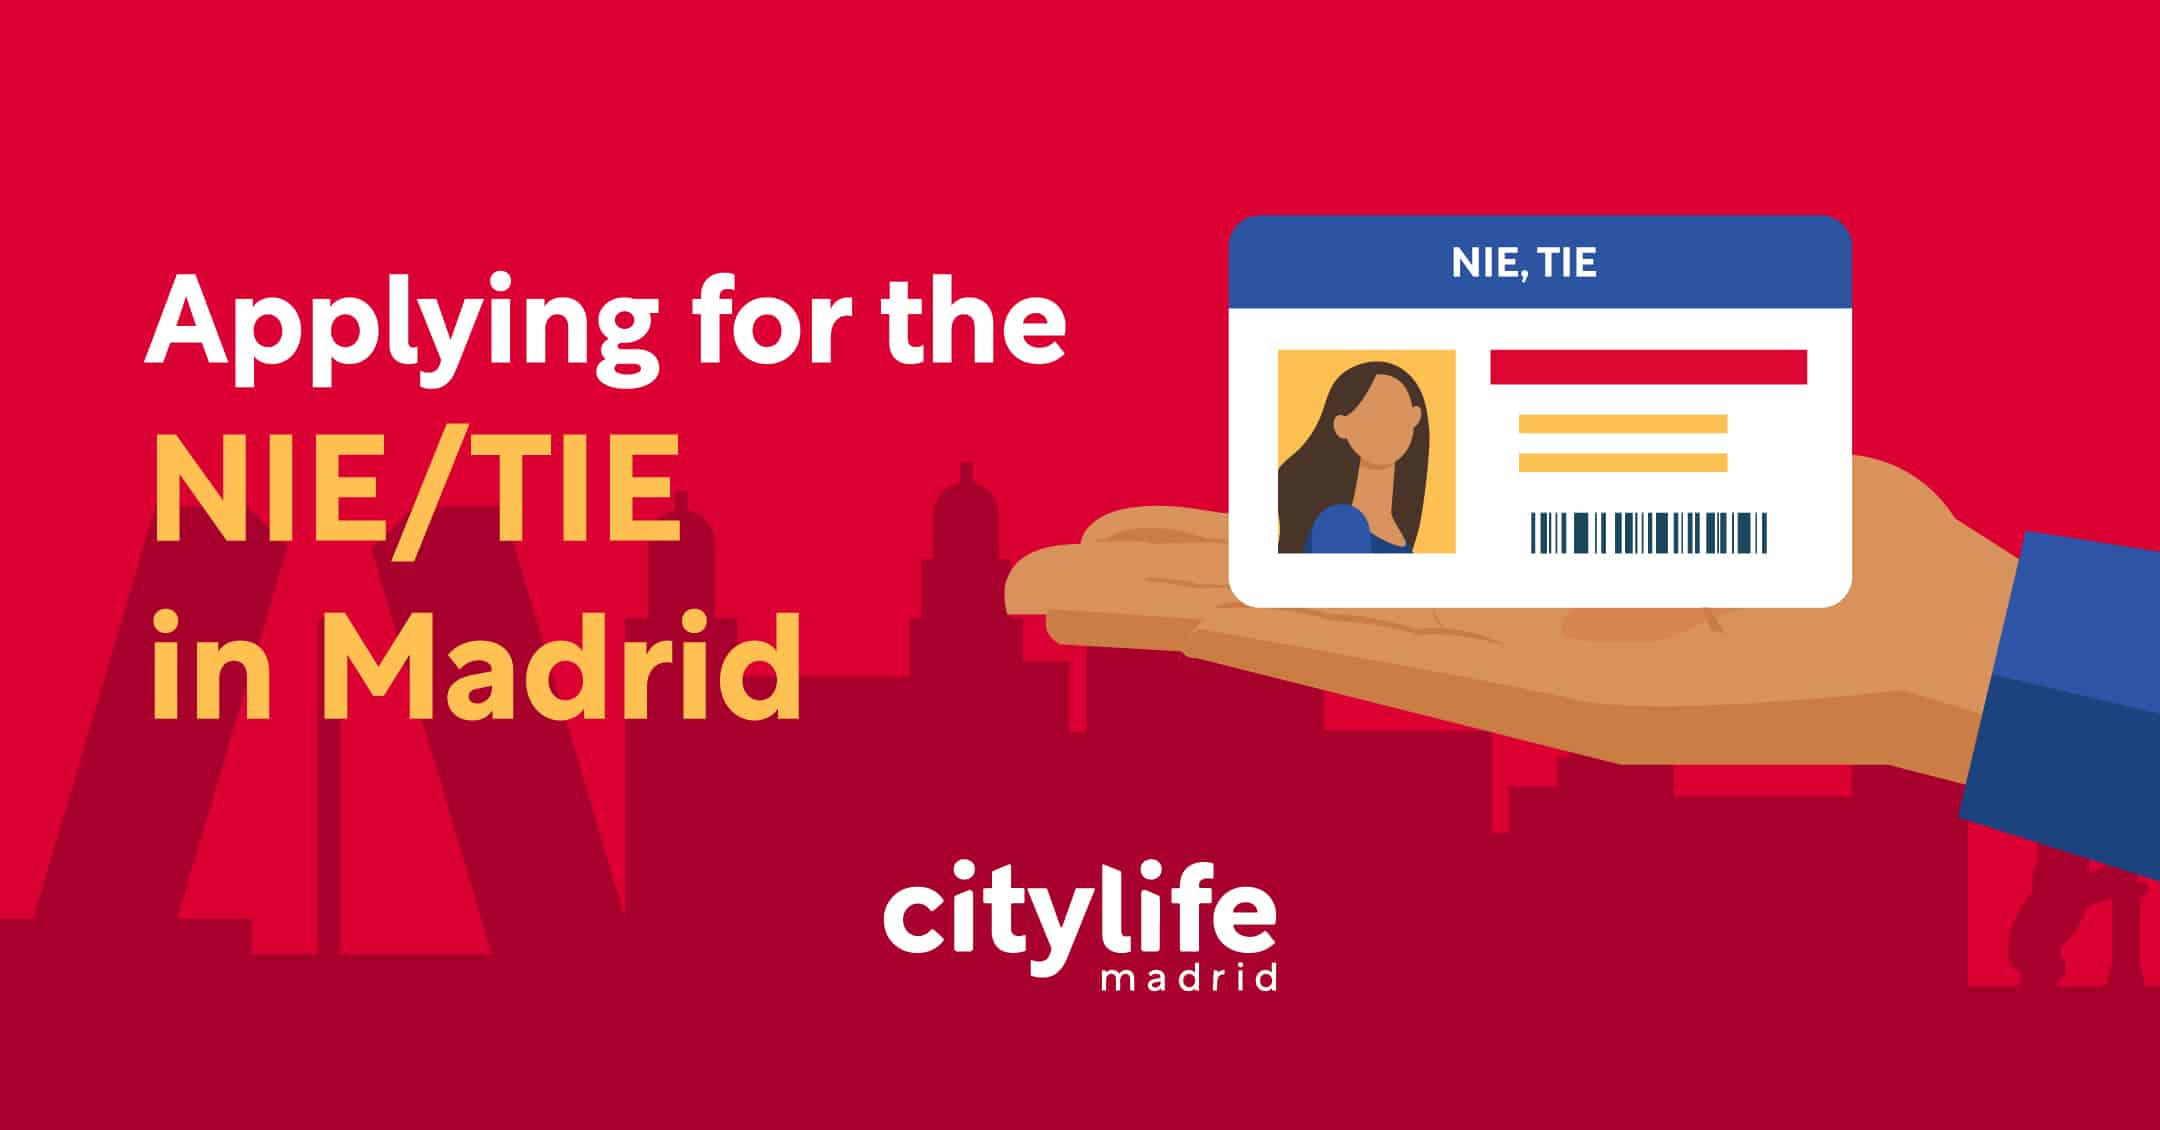 featured-image-applying-for-nie-tie-citylife-madrid